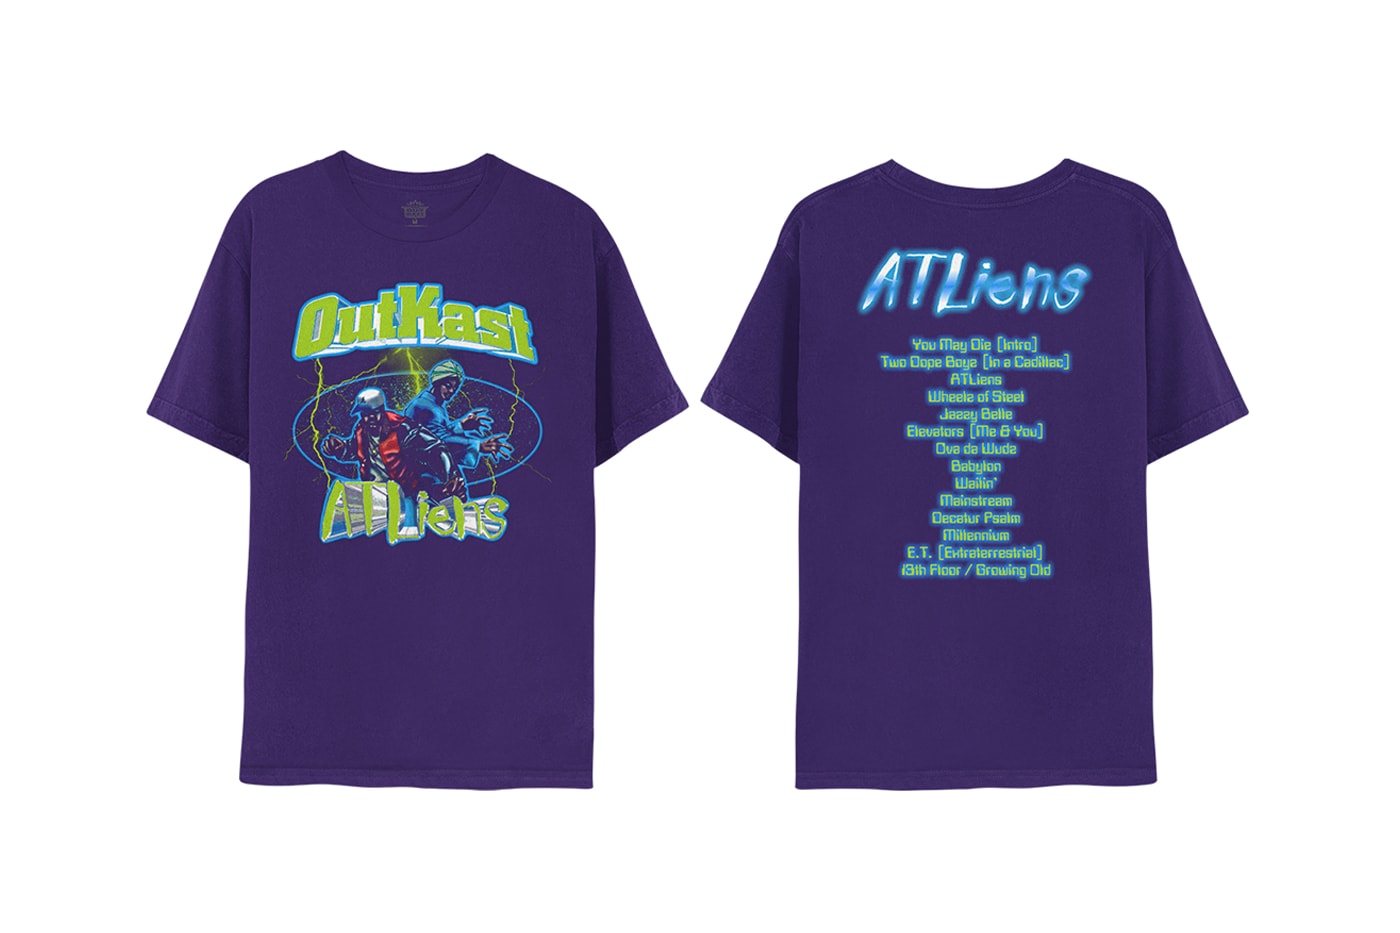 Outkast 'ATLiens' 25th Anniversary Merch Release